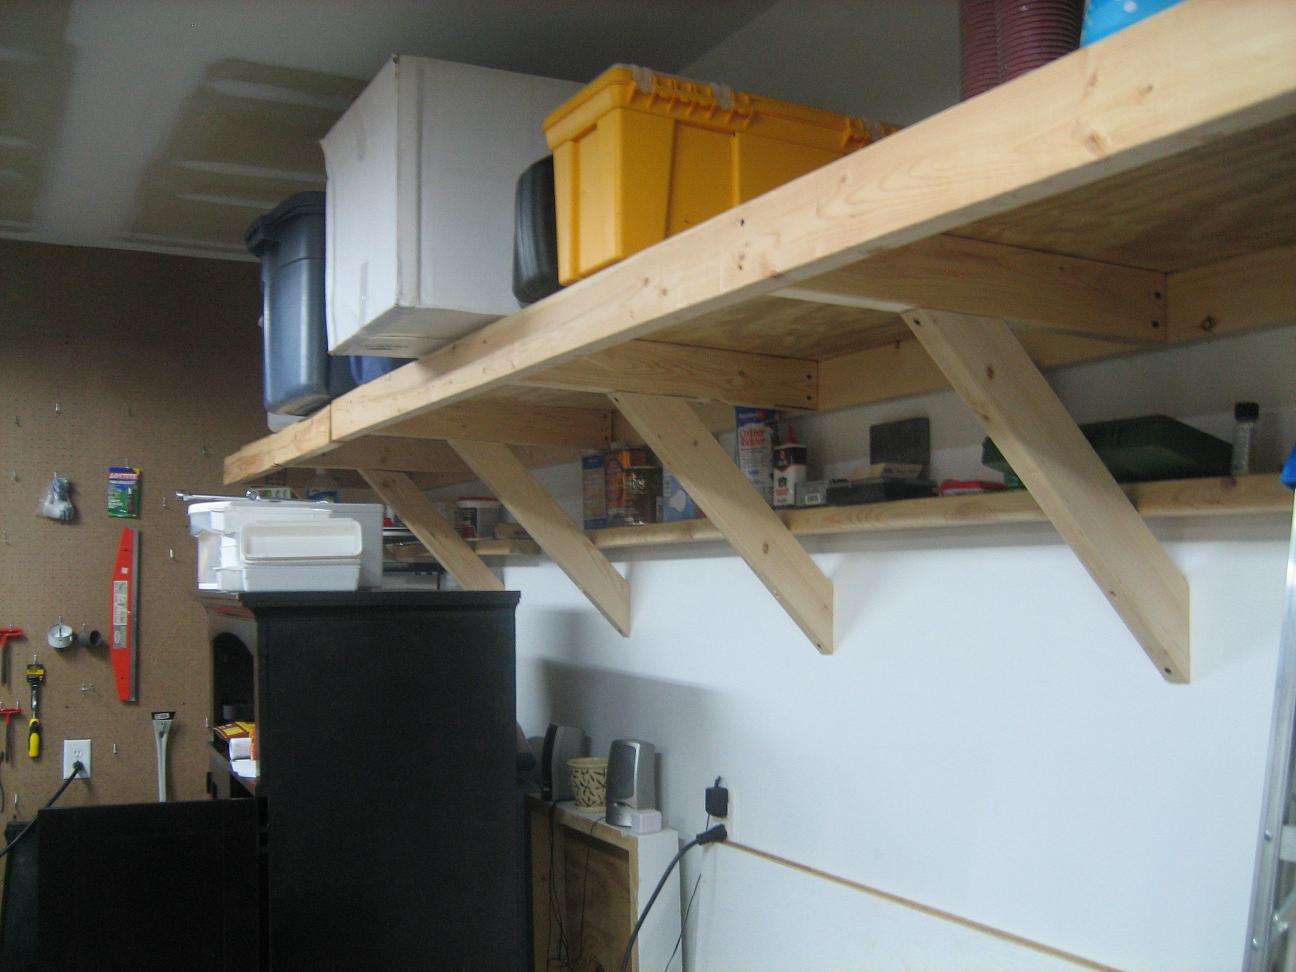 This was an early picture, without the other shelving unit.